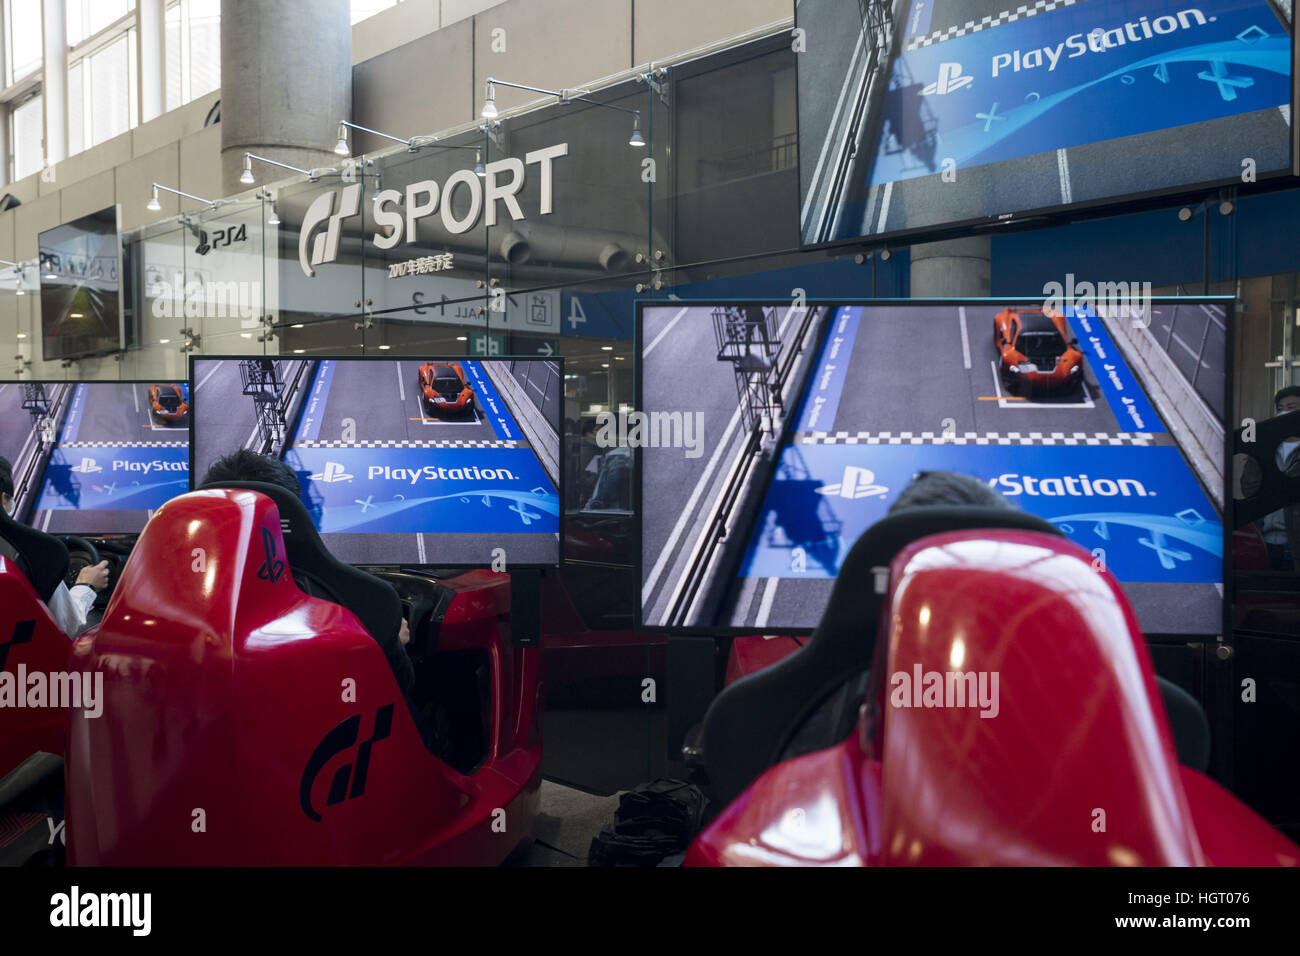 Tokyo, Japan. 13th Jan, 2017. Sony Interactive Entertainment Japan & Asiaha have Gran Turismo Sport PS4 Pro during the Tokyo Auto Salon 2017. Tokyo Auto Salon is Japan's largest show for custom cars with 417 automobile-related exhibitors displaying their latest cars, products. © Alessandro Di Ciommo/ZUMA Wire/Alamy Live News Stock Photo